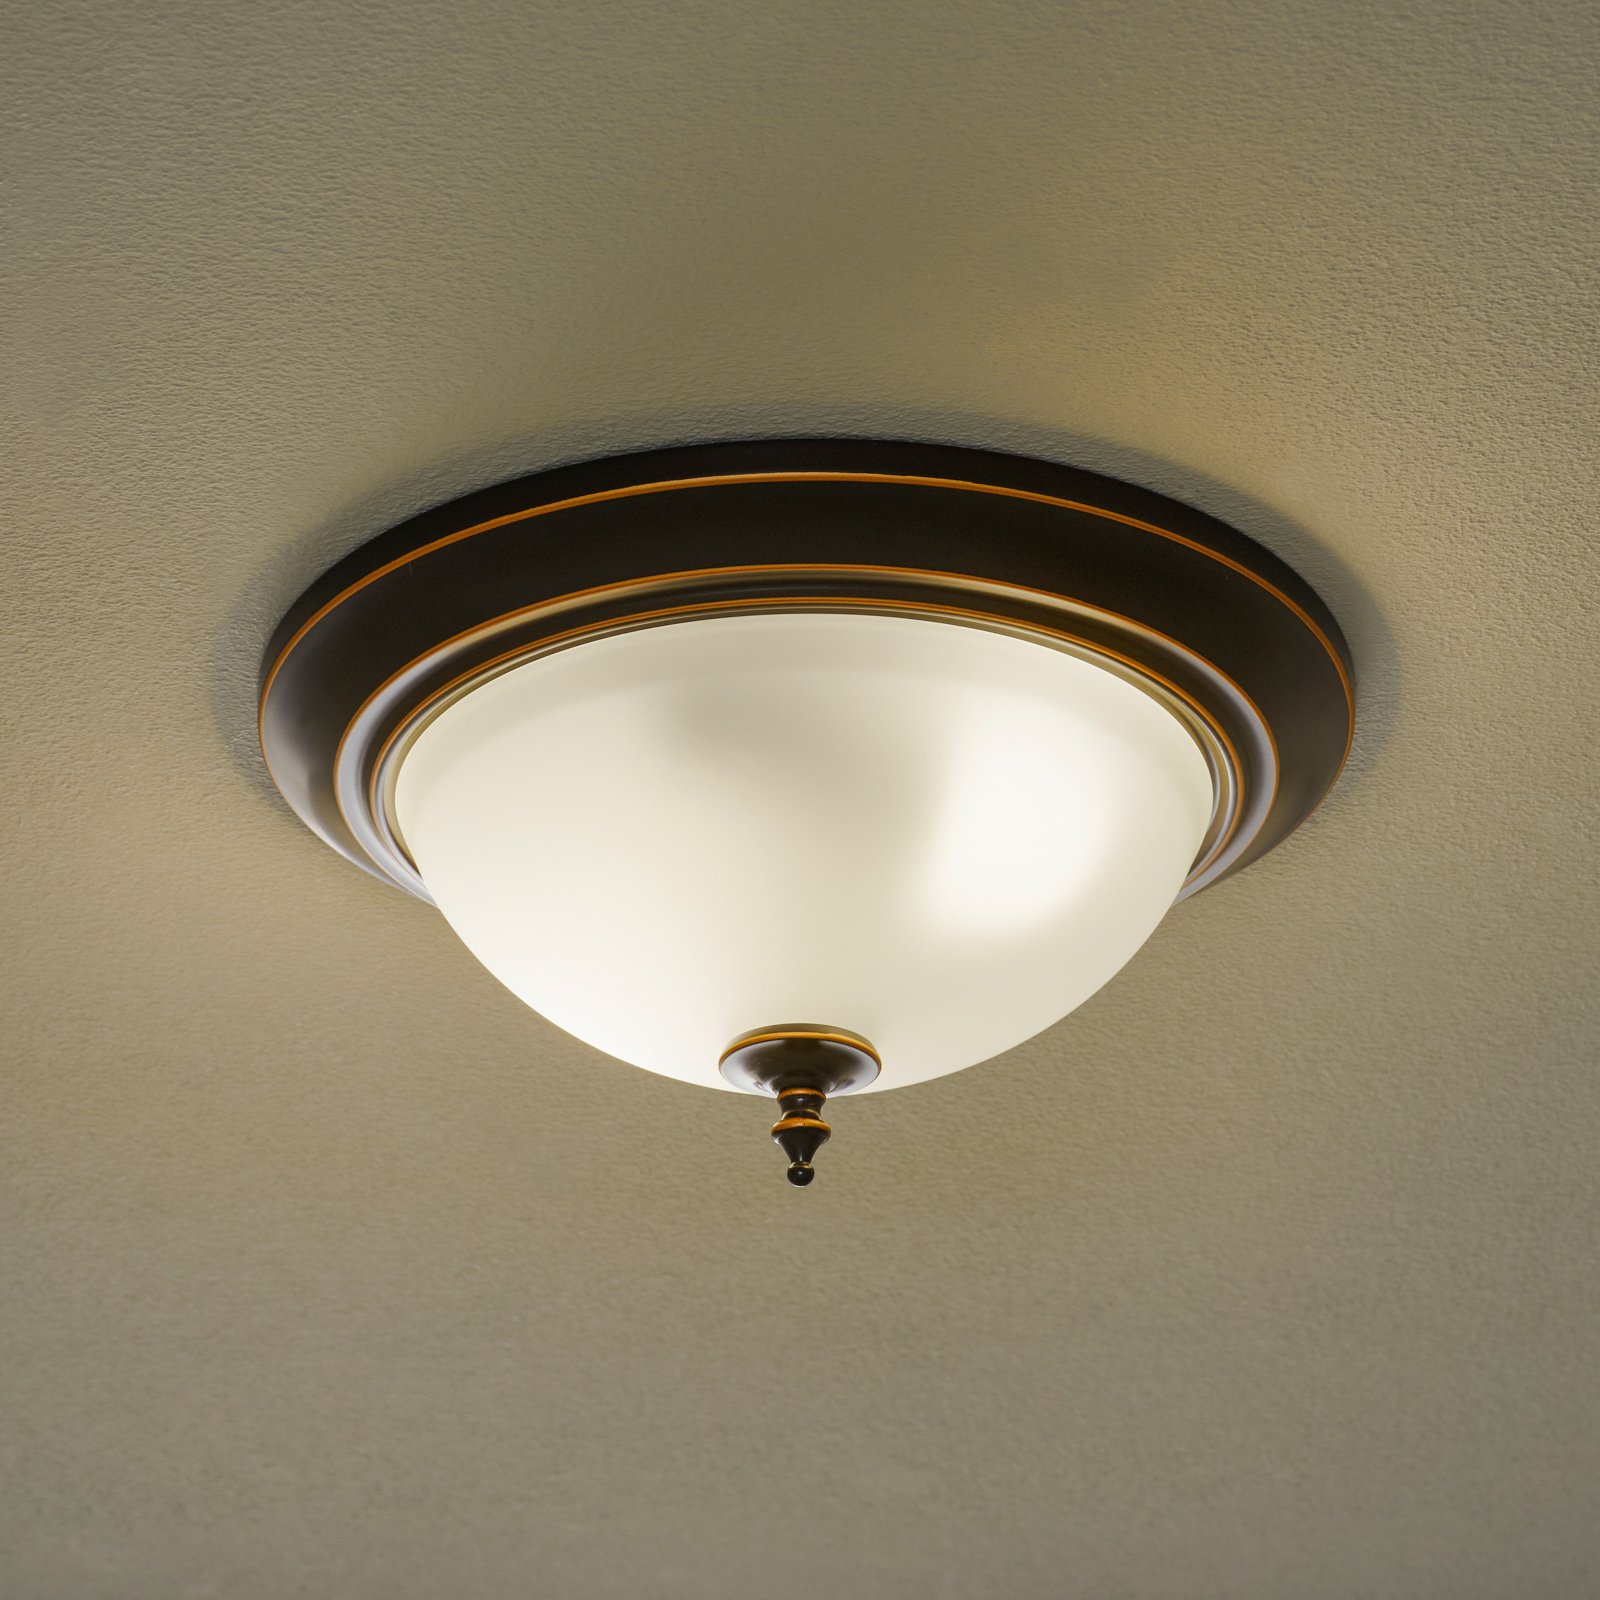 Westinghouse Harwell ceiling light, bronze